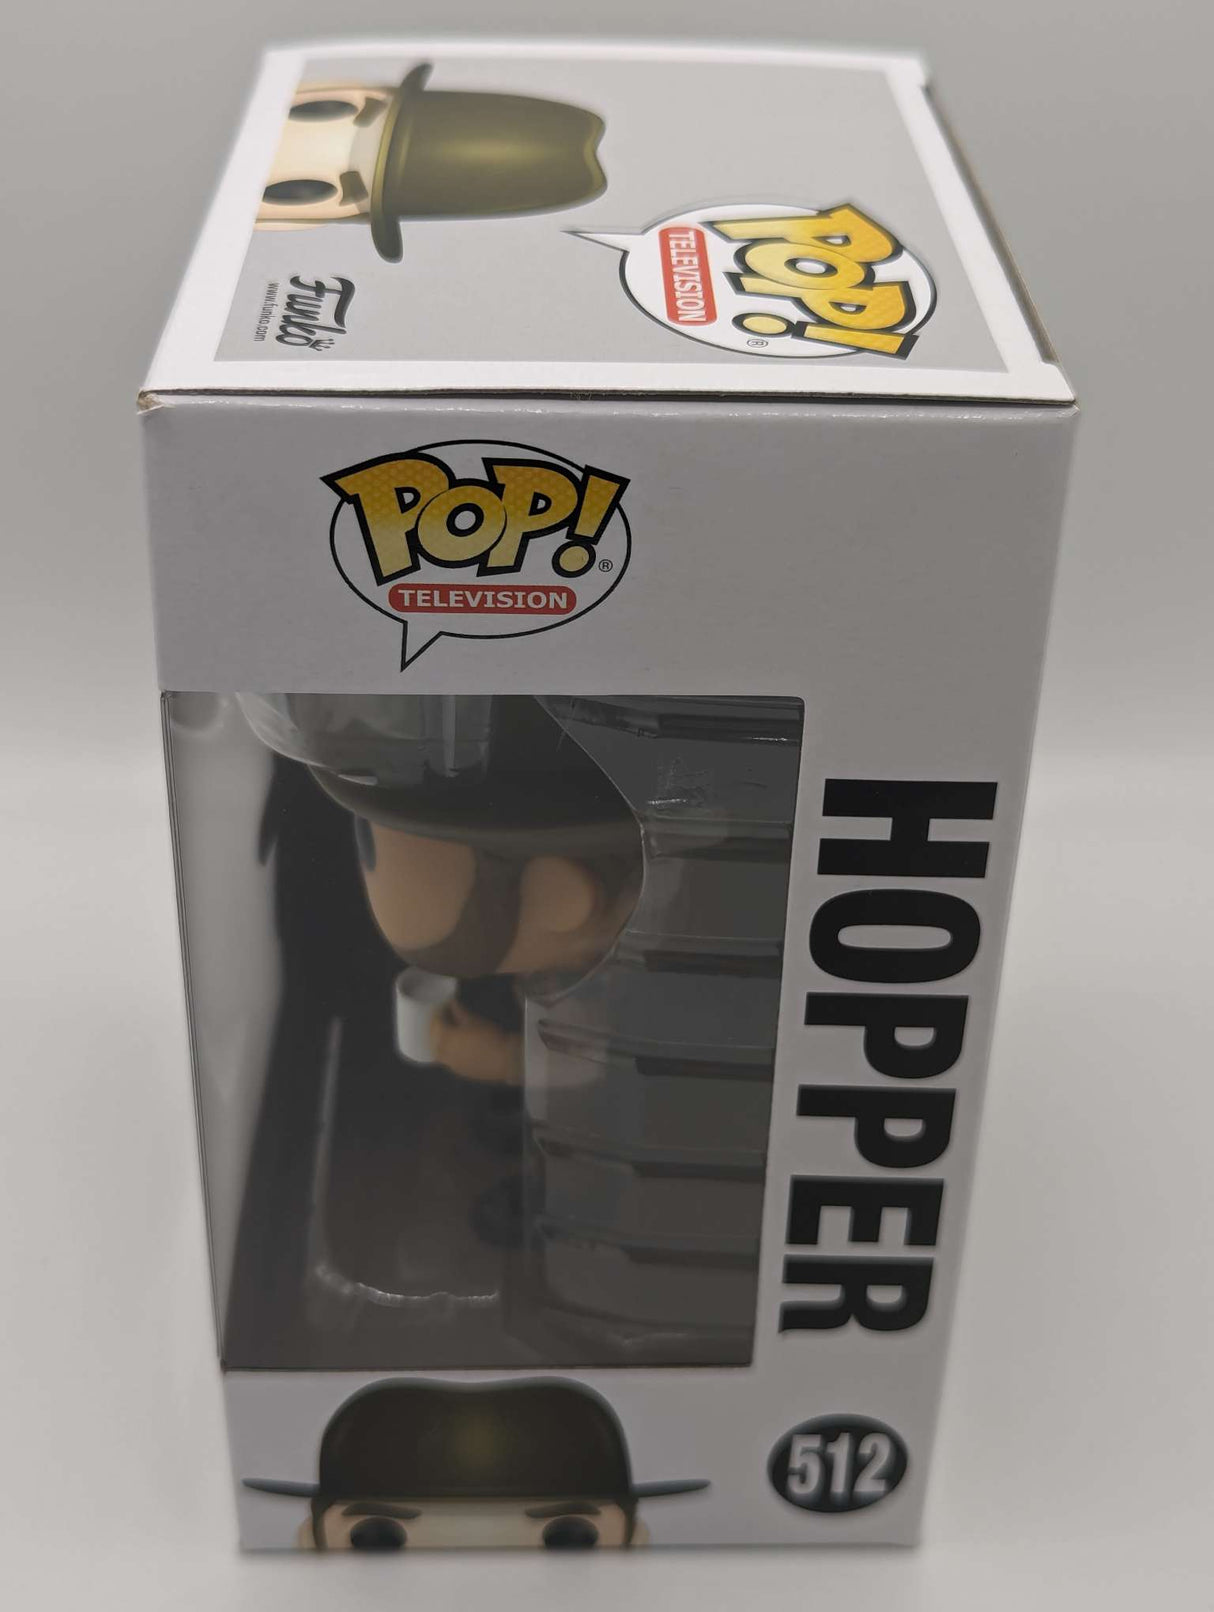 Damaged Box | Funko Pop Television | Stranger Things | Hopper with Donut #512